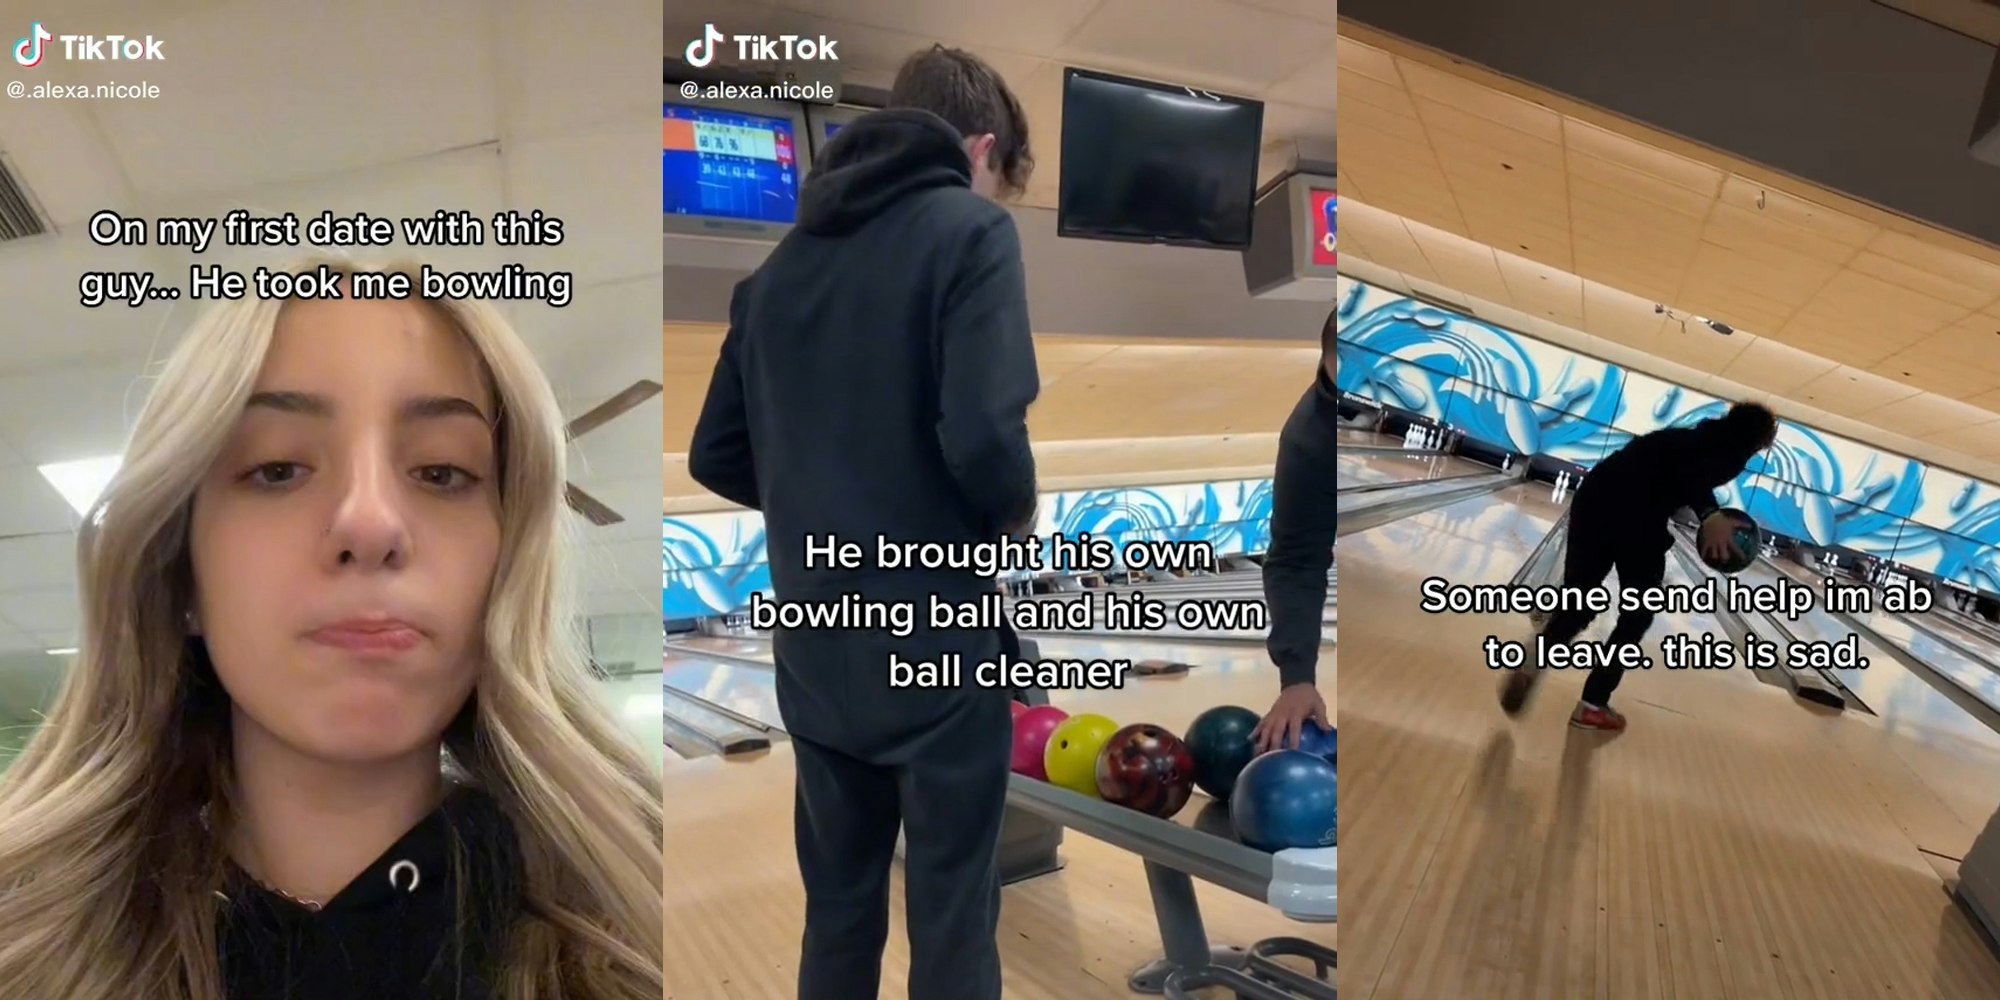 Woman Says Man Took His Own Bowling Ball on Date, Sparking Debate